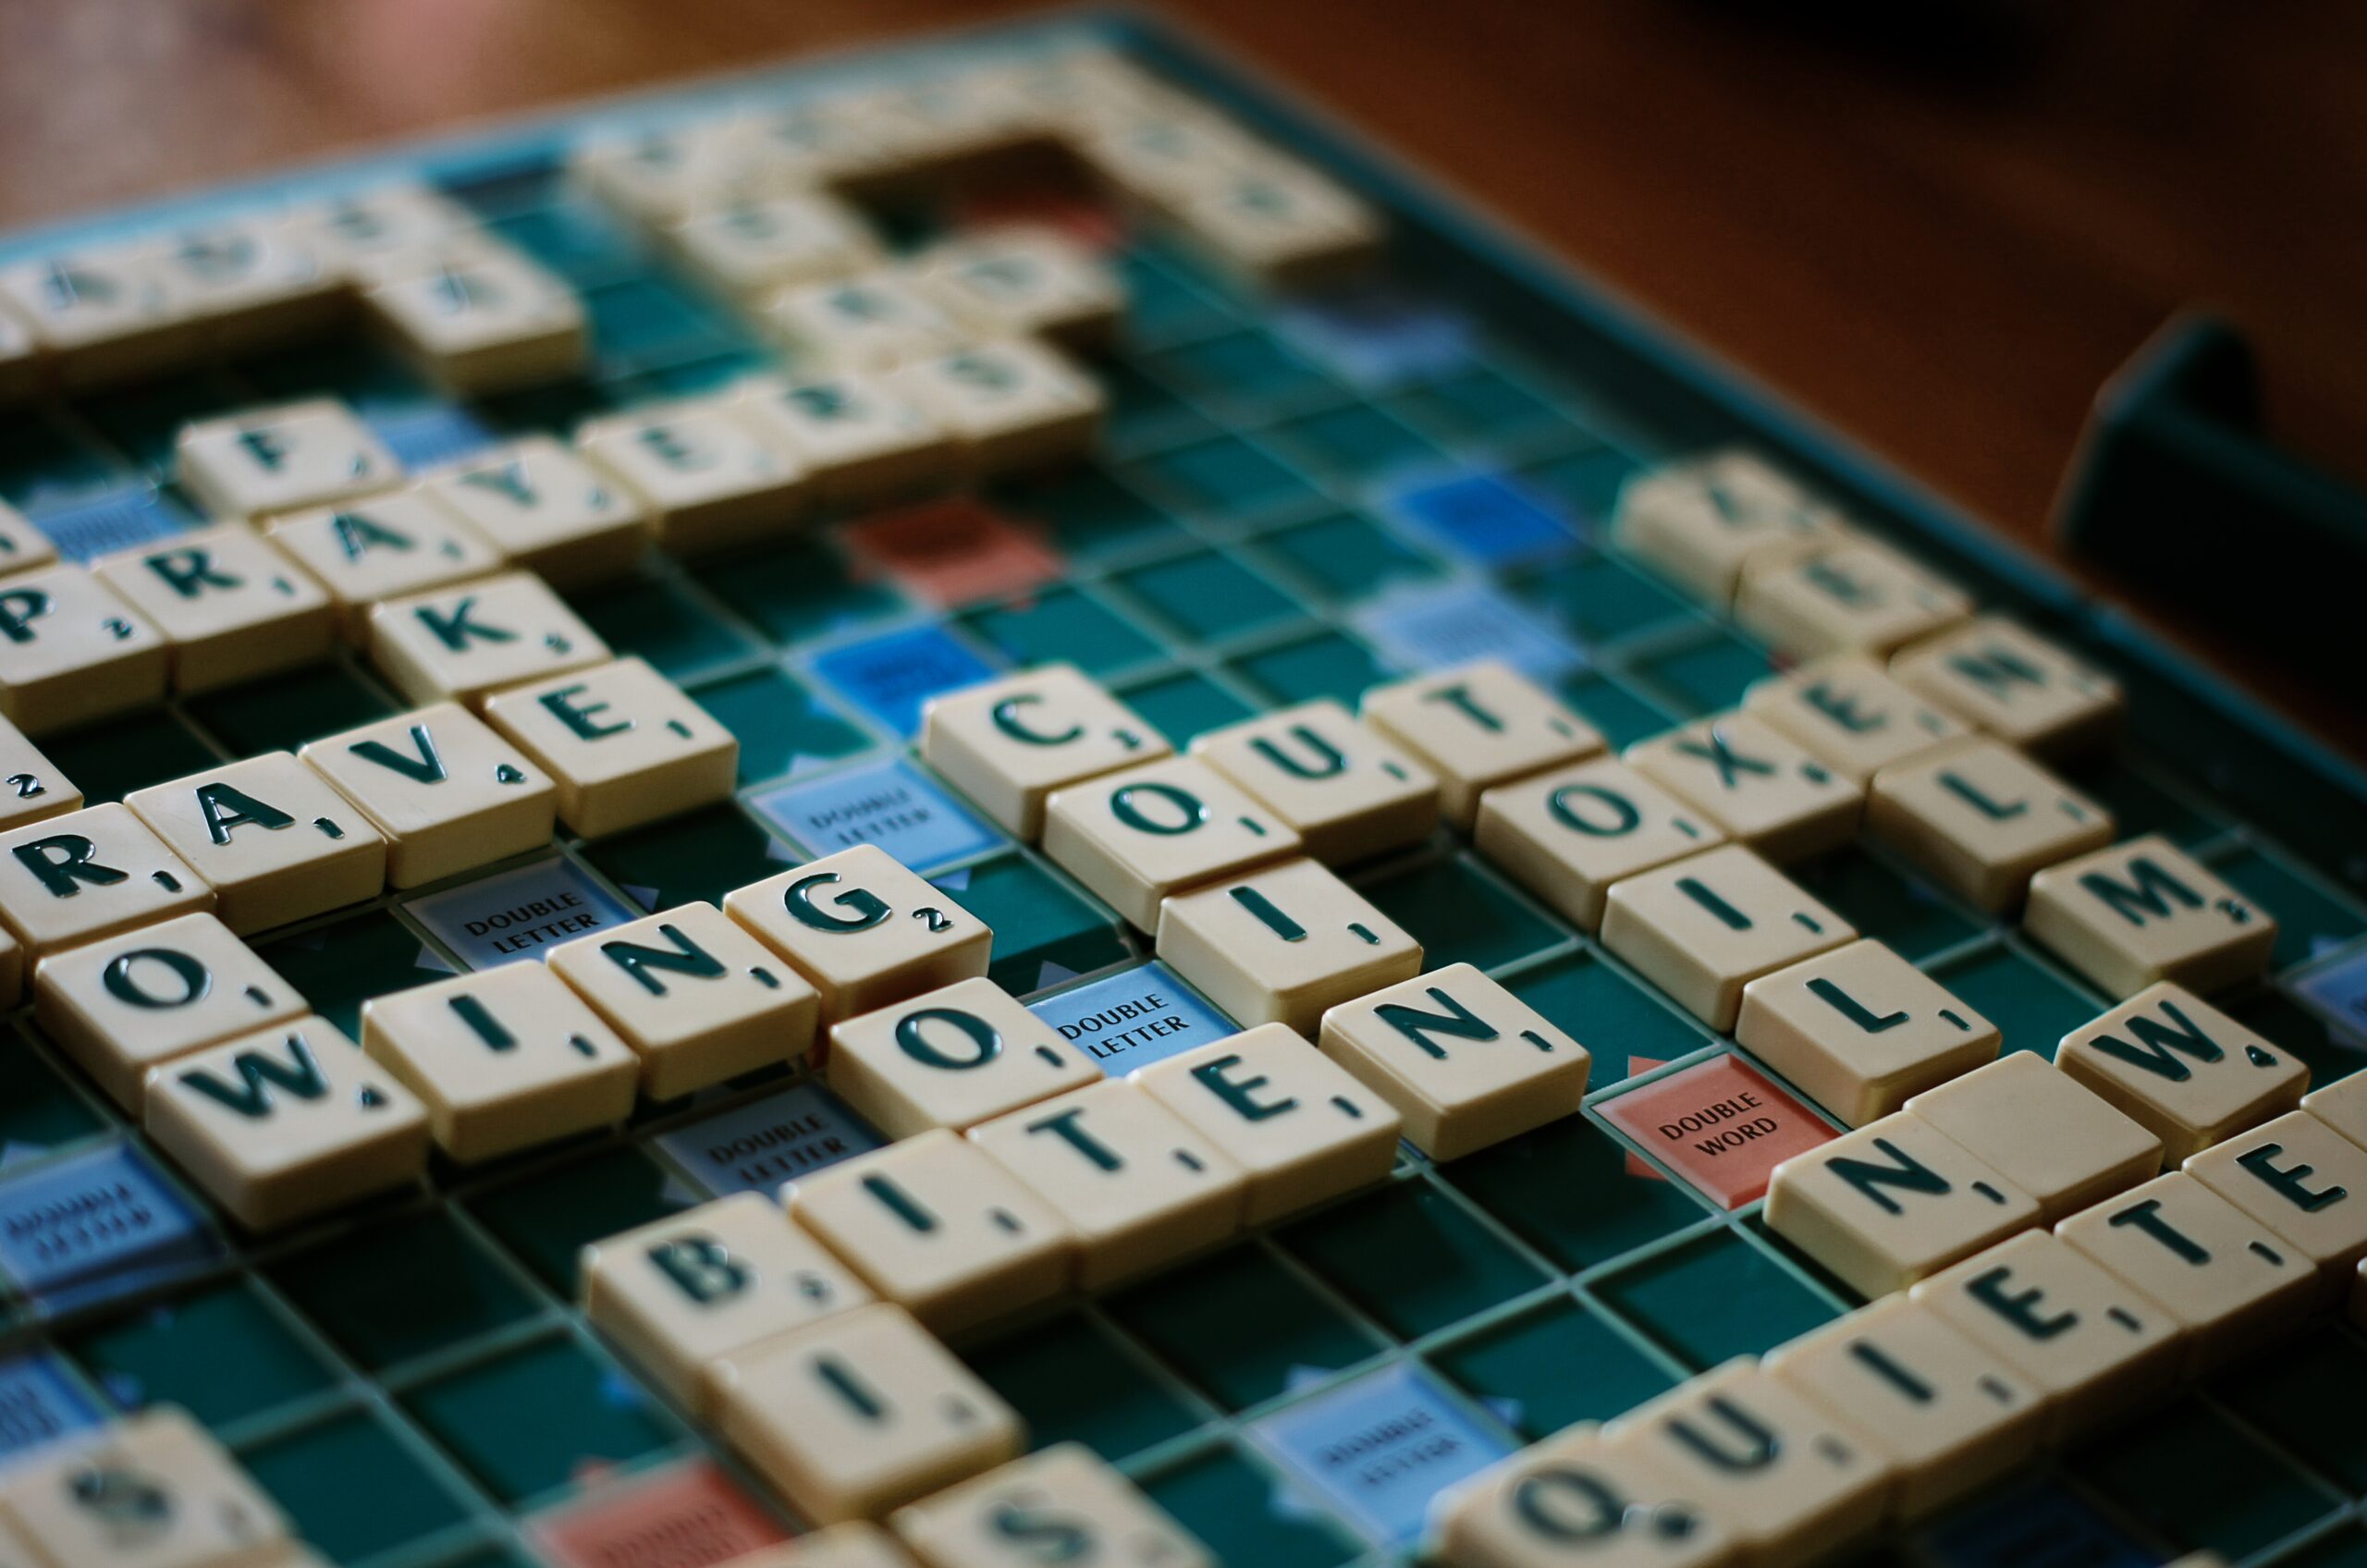 a game of English language Scrabble in progress